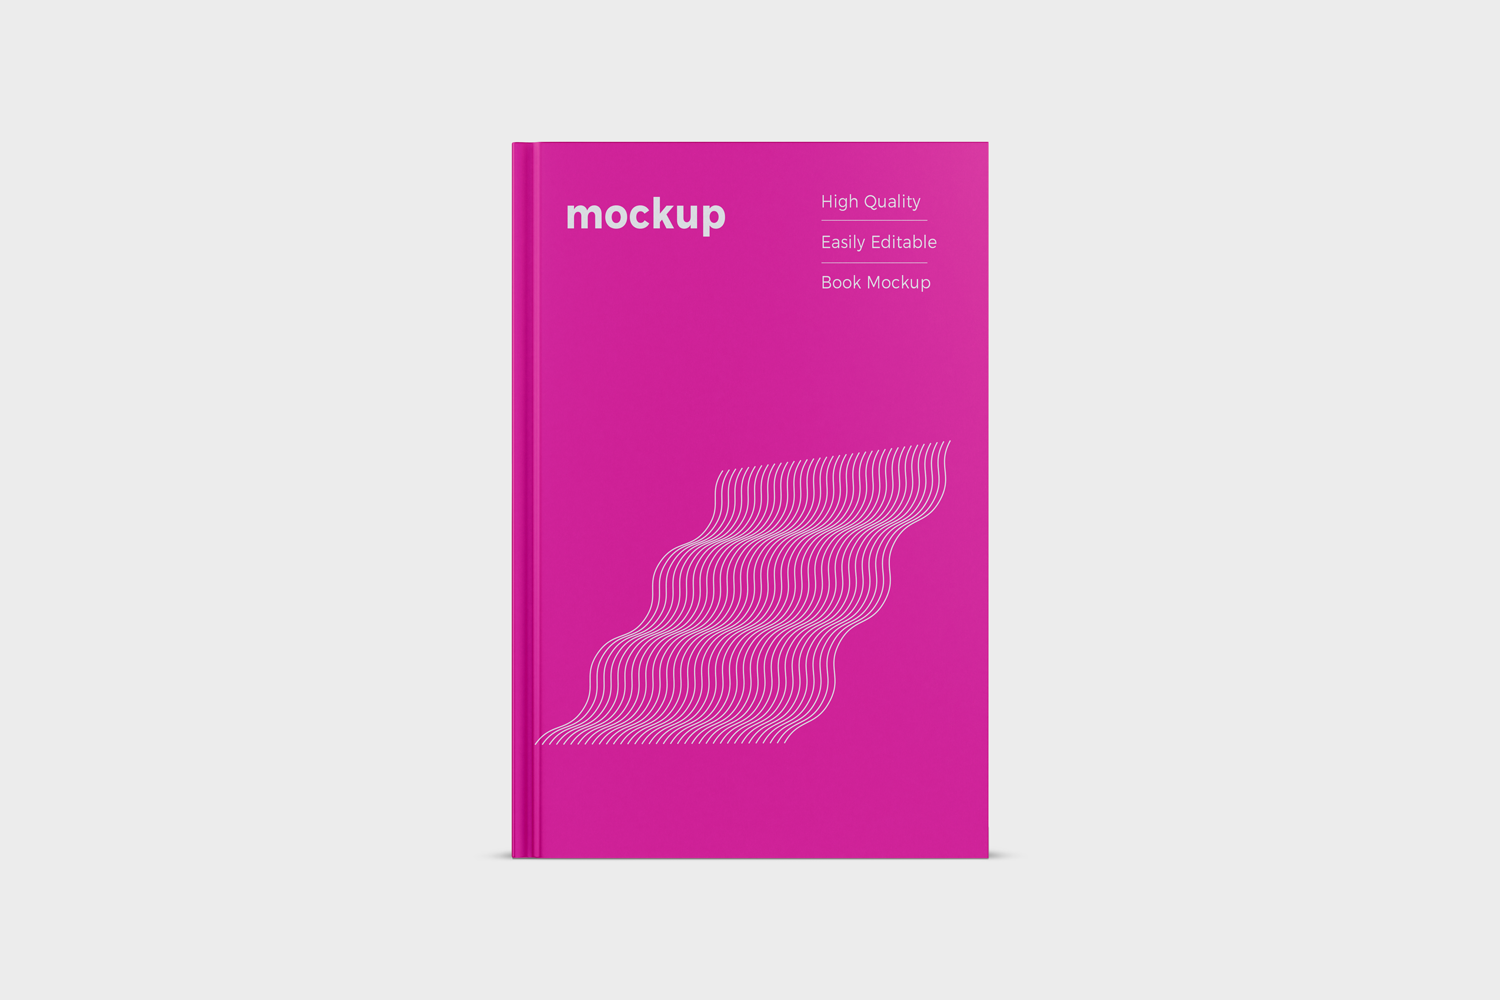 hardcover book cover mockup free